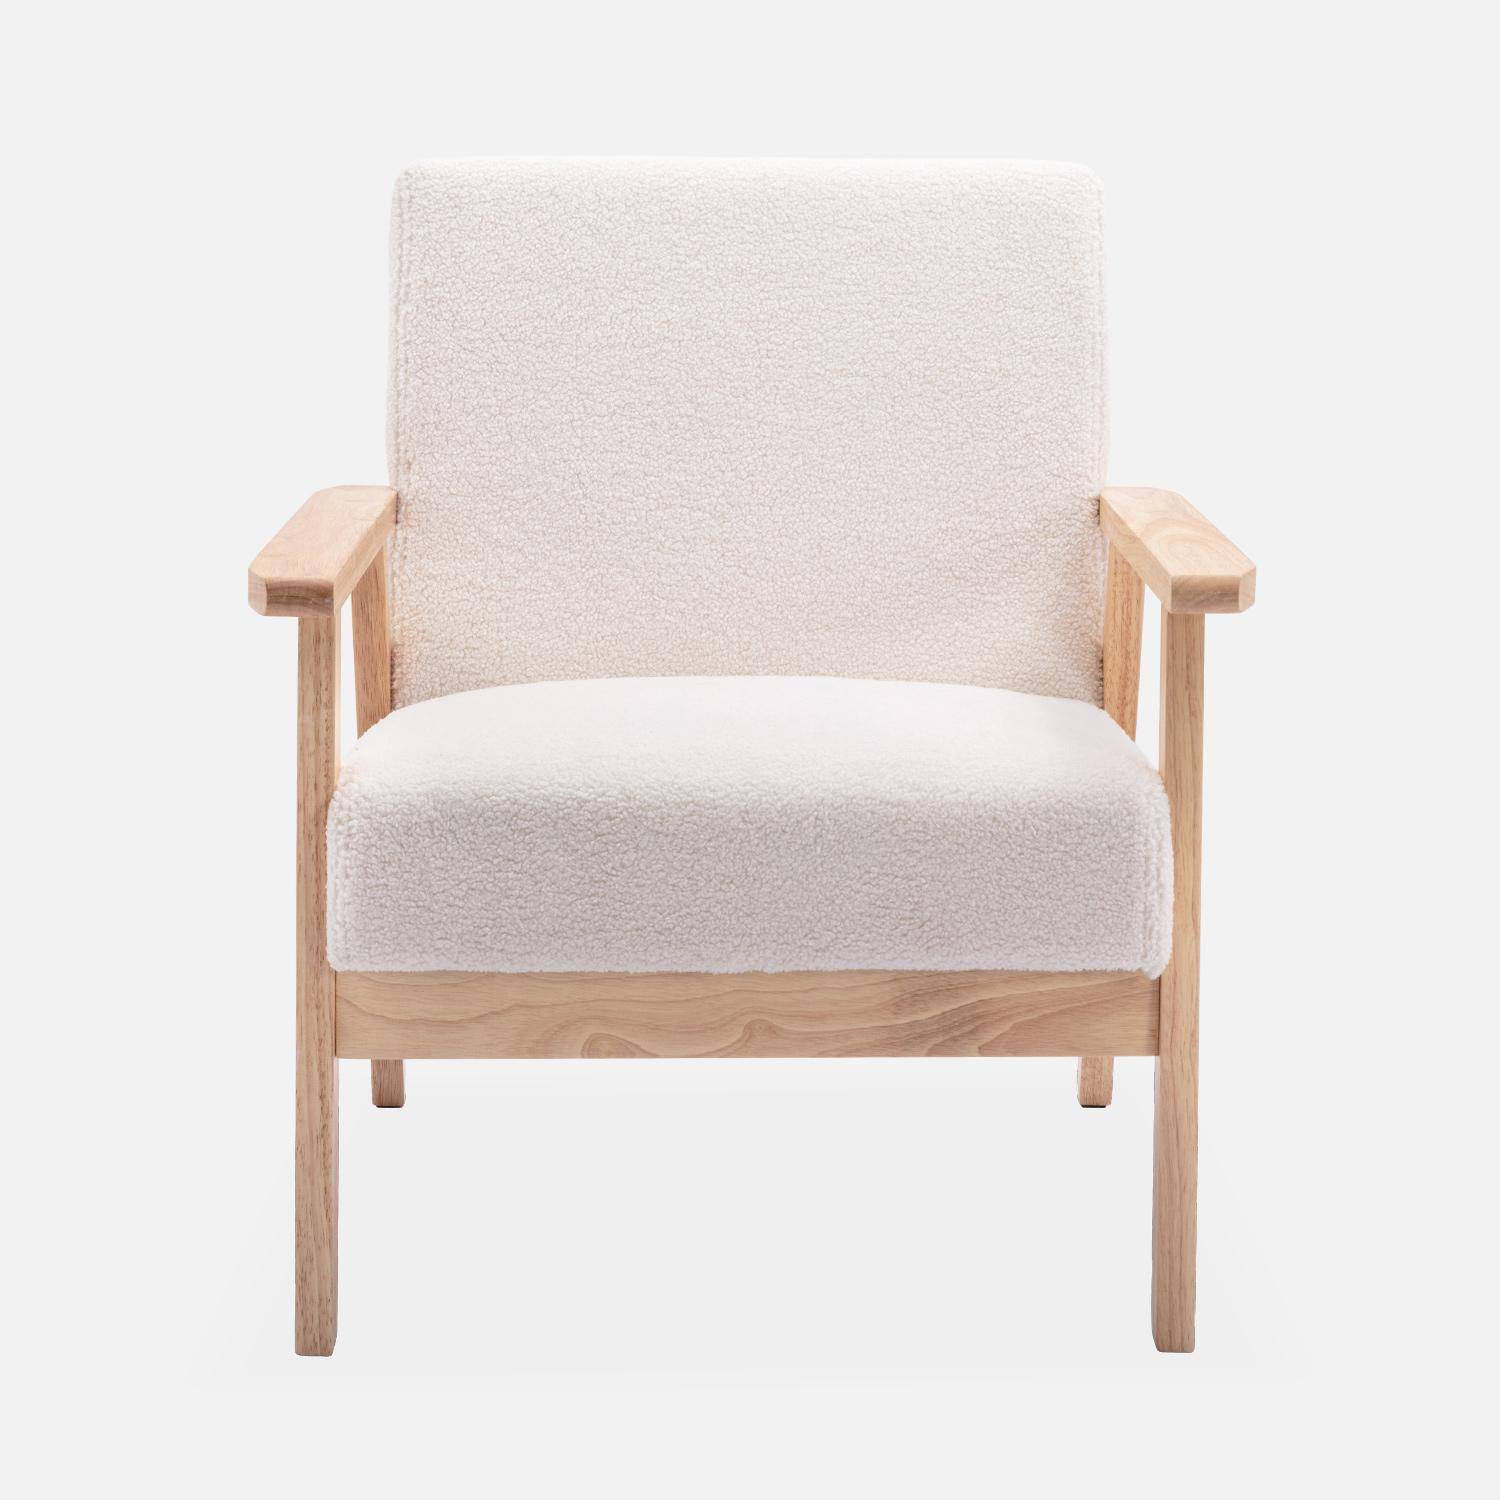 Scandi-style boucle armchair, wooden frame and boucle fabric, 64x69.5x73cm - Isak Boucle - White,sweeek,Photo4